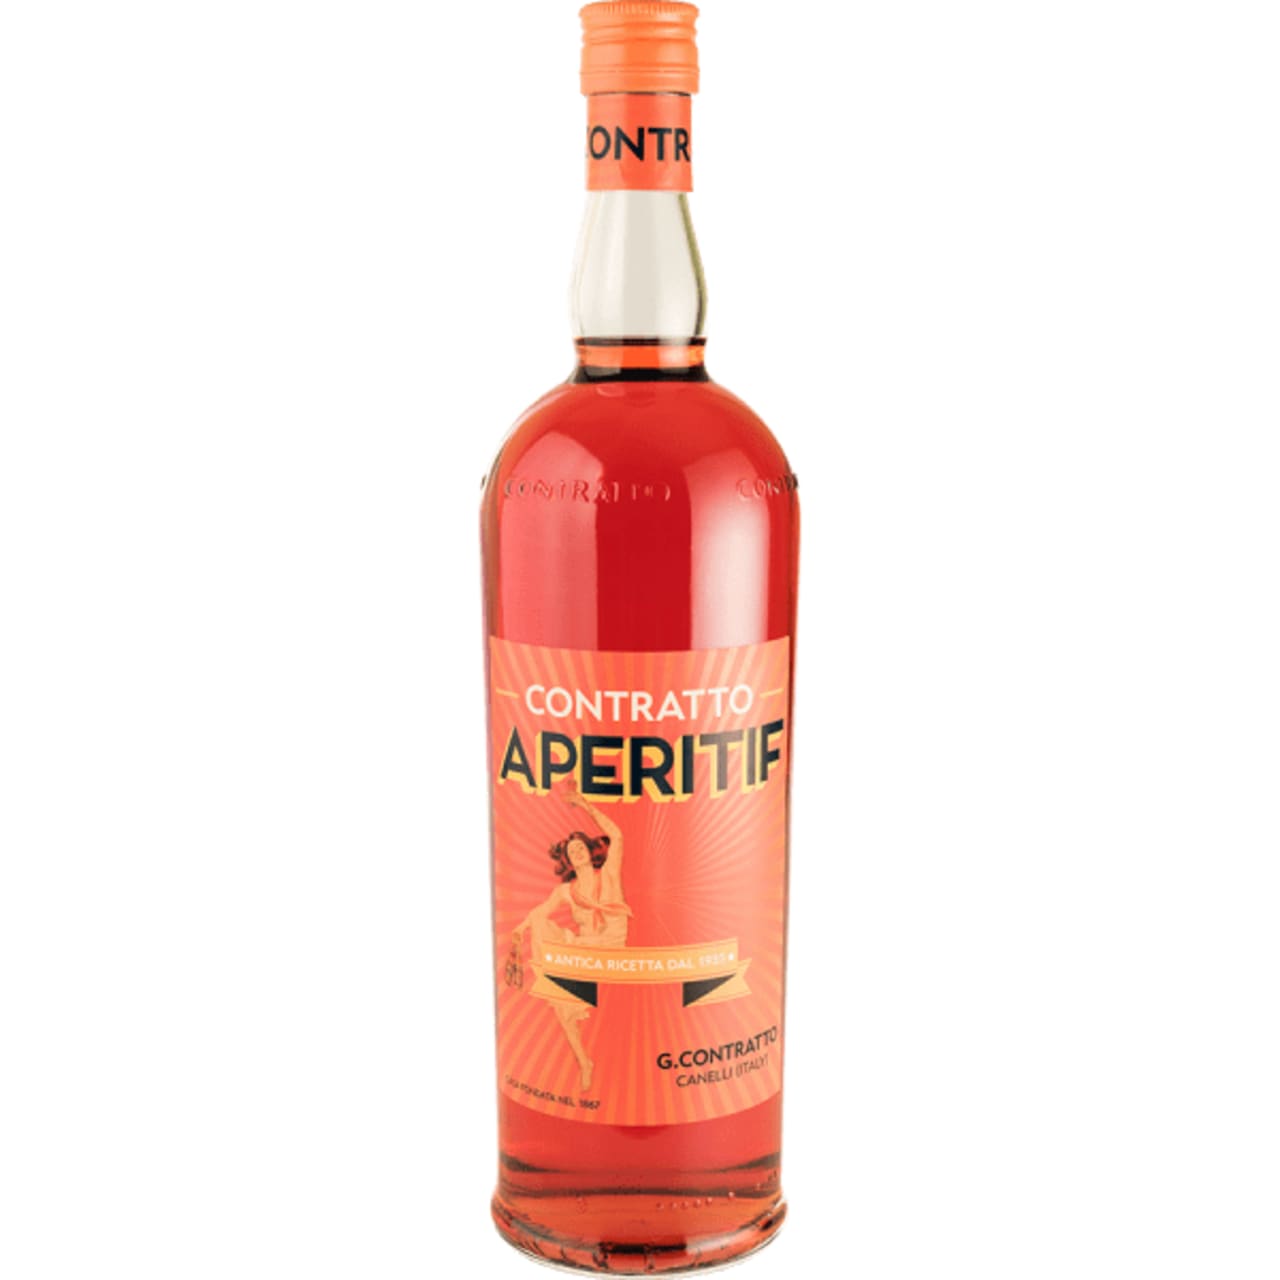 Based on original family recipe from the 1935, Contratto Aperitif has lively notes of rhubarb, lemon, tangerine and herbal notes bringing fresh and lively citrus balanced by a bittersweet edge.